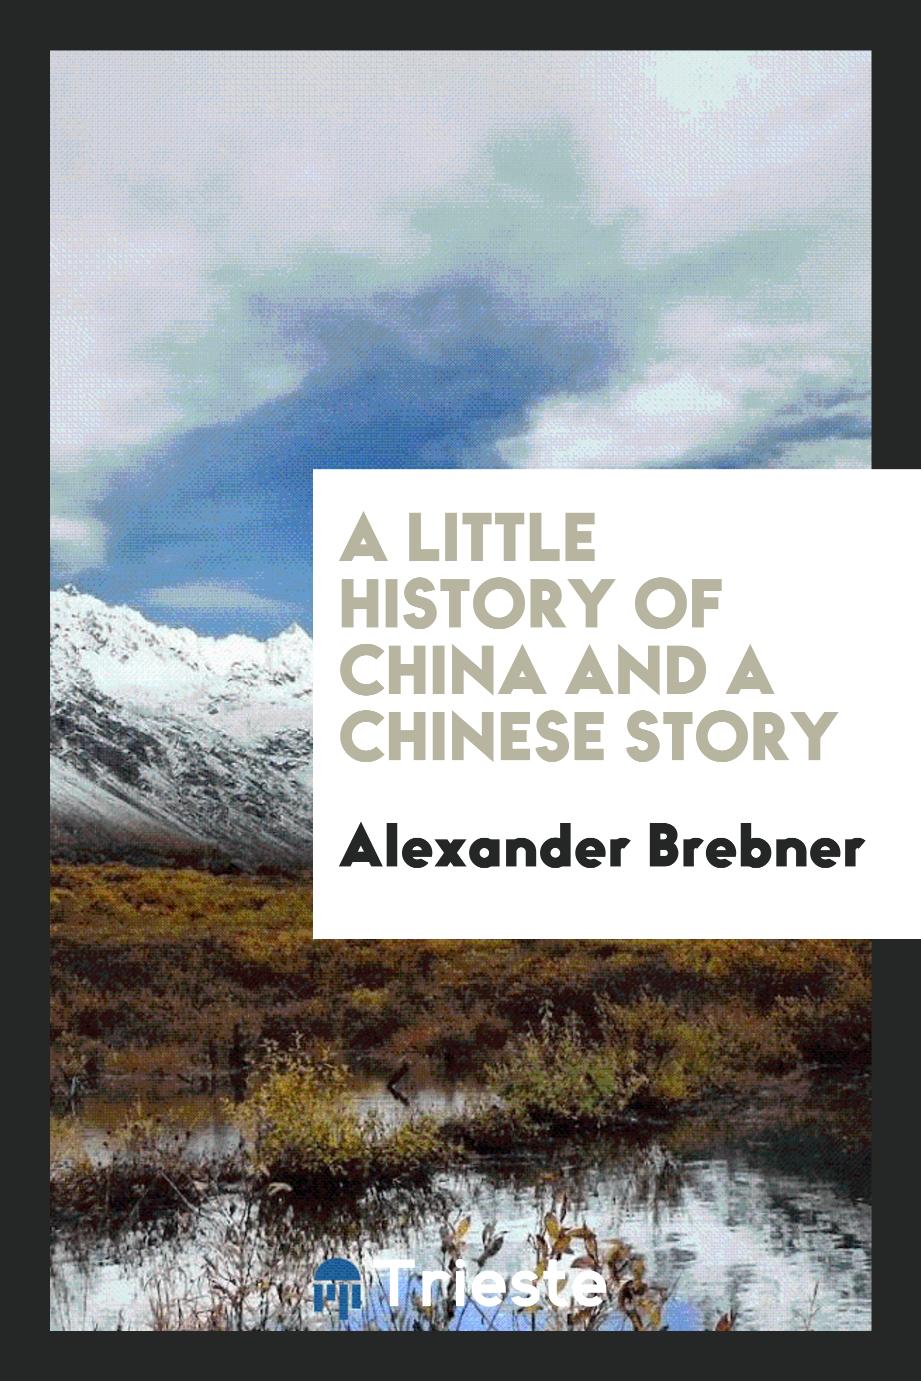 A Little History of China and a Chinese Story